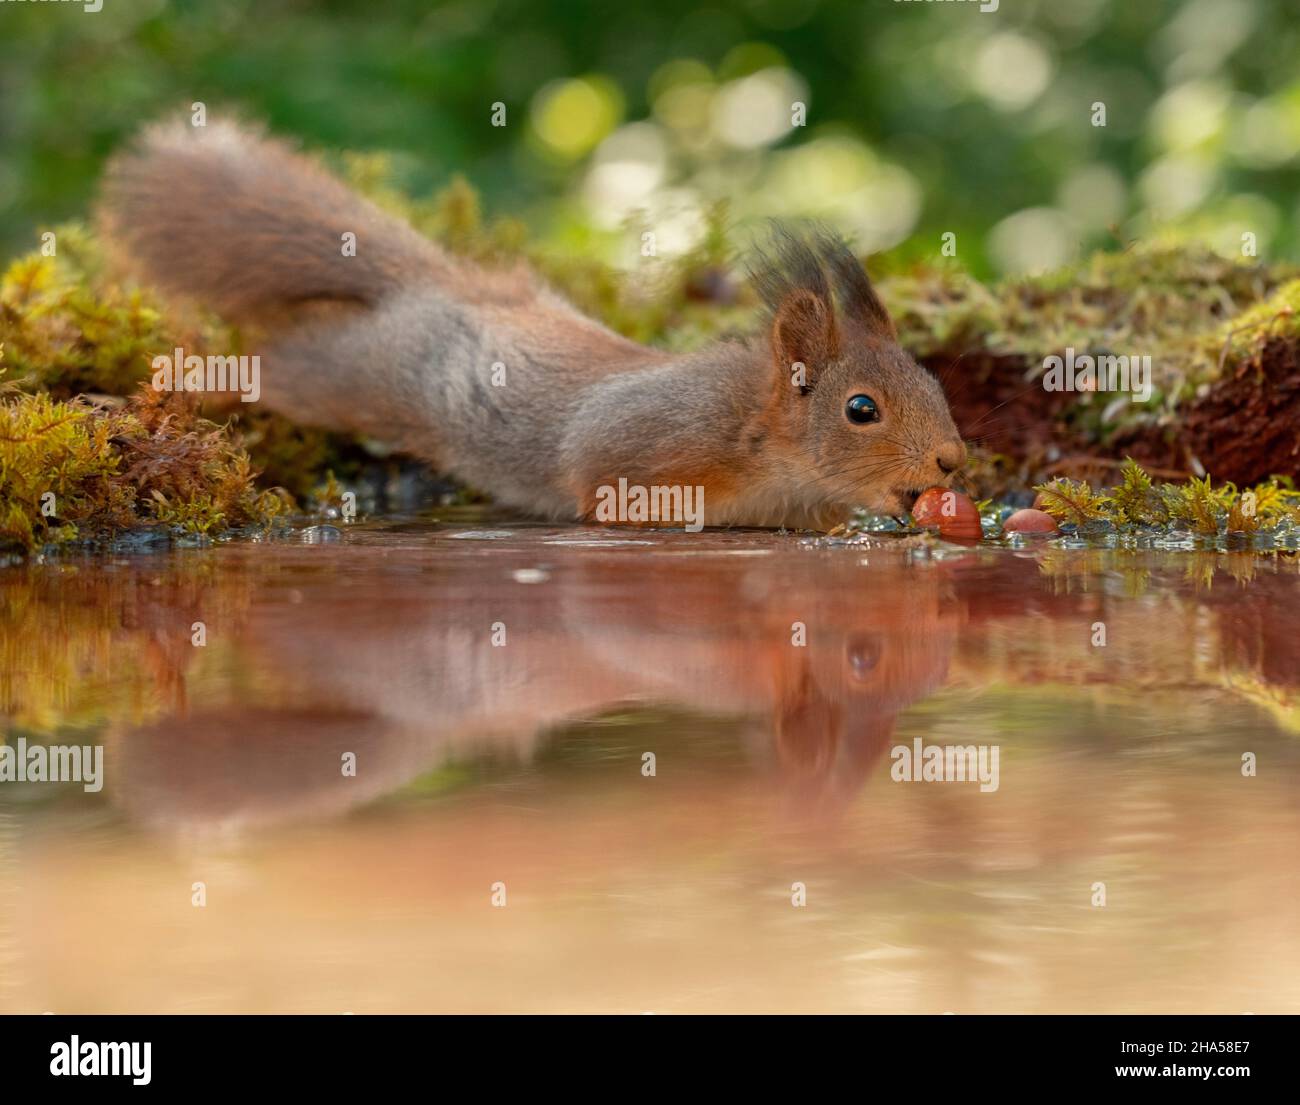 red squirrel is standing with water with nut Stock Photo